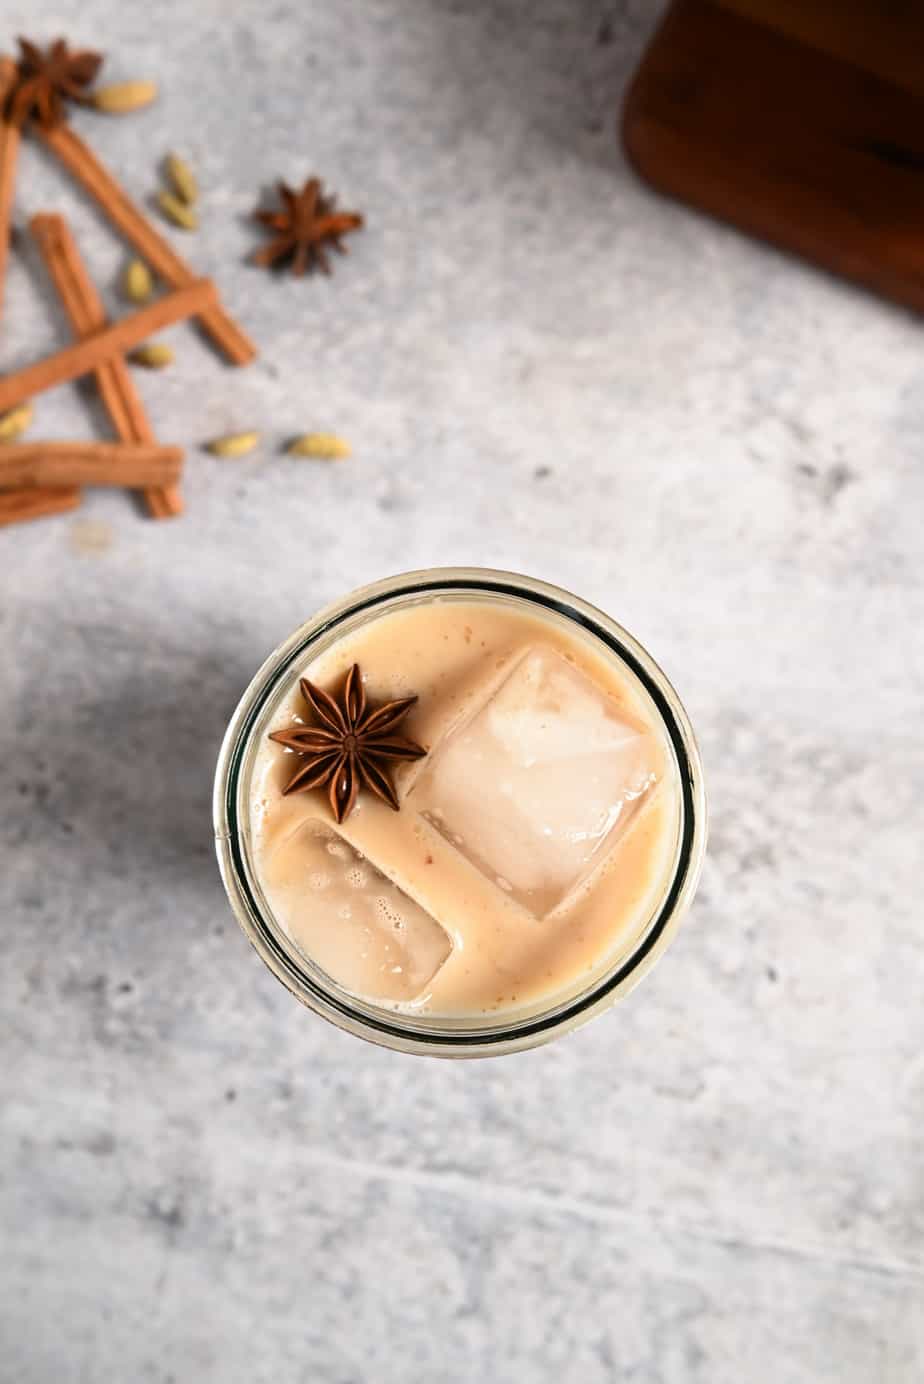 Overhead view of a glass of iced chai garnished with a star anise pod